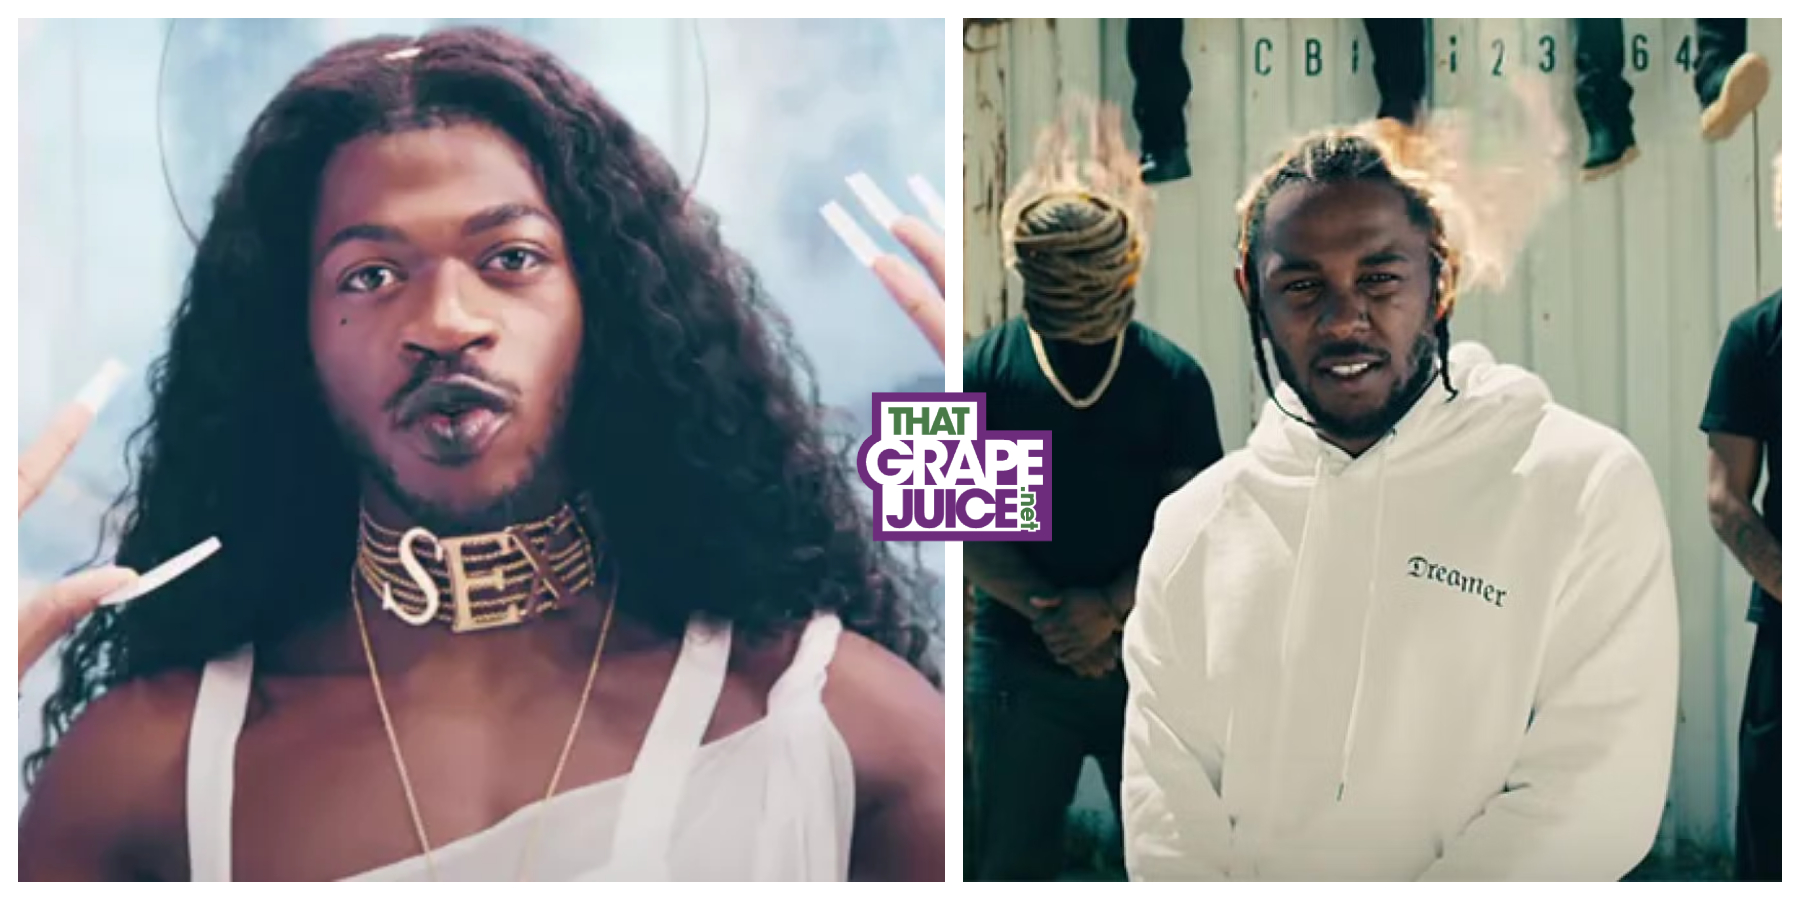 Kendrick Lamar Fans Say Lil Nas X’s ‘J Christ’ is a “Walmart Version Ripoff” of ‘Humble’ / Spotify Says New Song is “Mid”